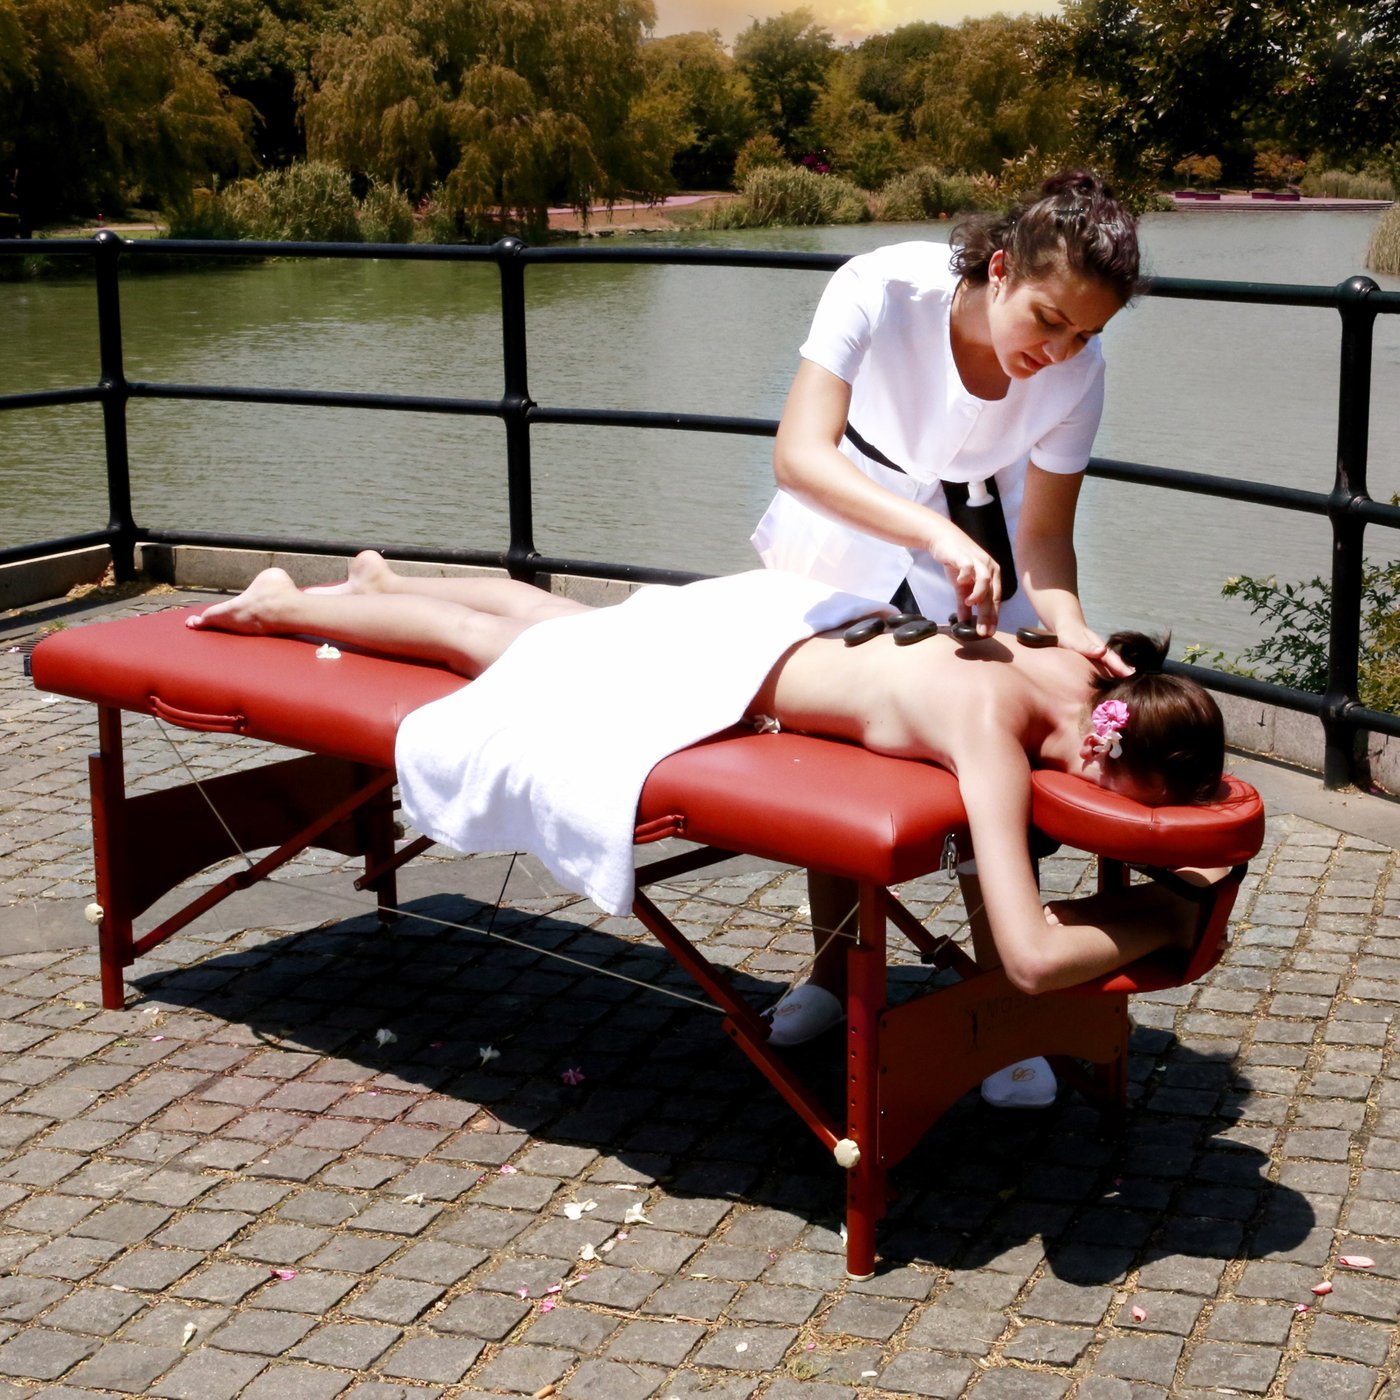 25" FAIRLANE™ Portable Massage Table Package with Sport Sized That's PERFECT For Pros On the Go! without Therma Top (Cinnamon Color)